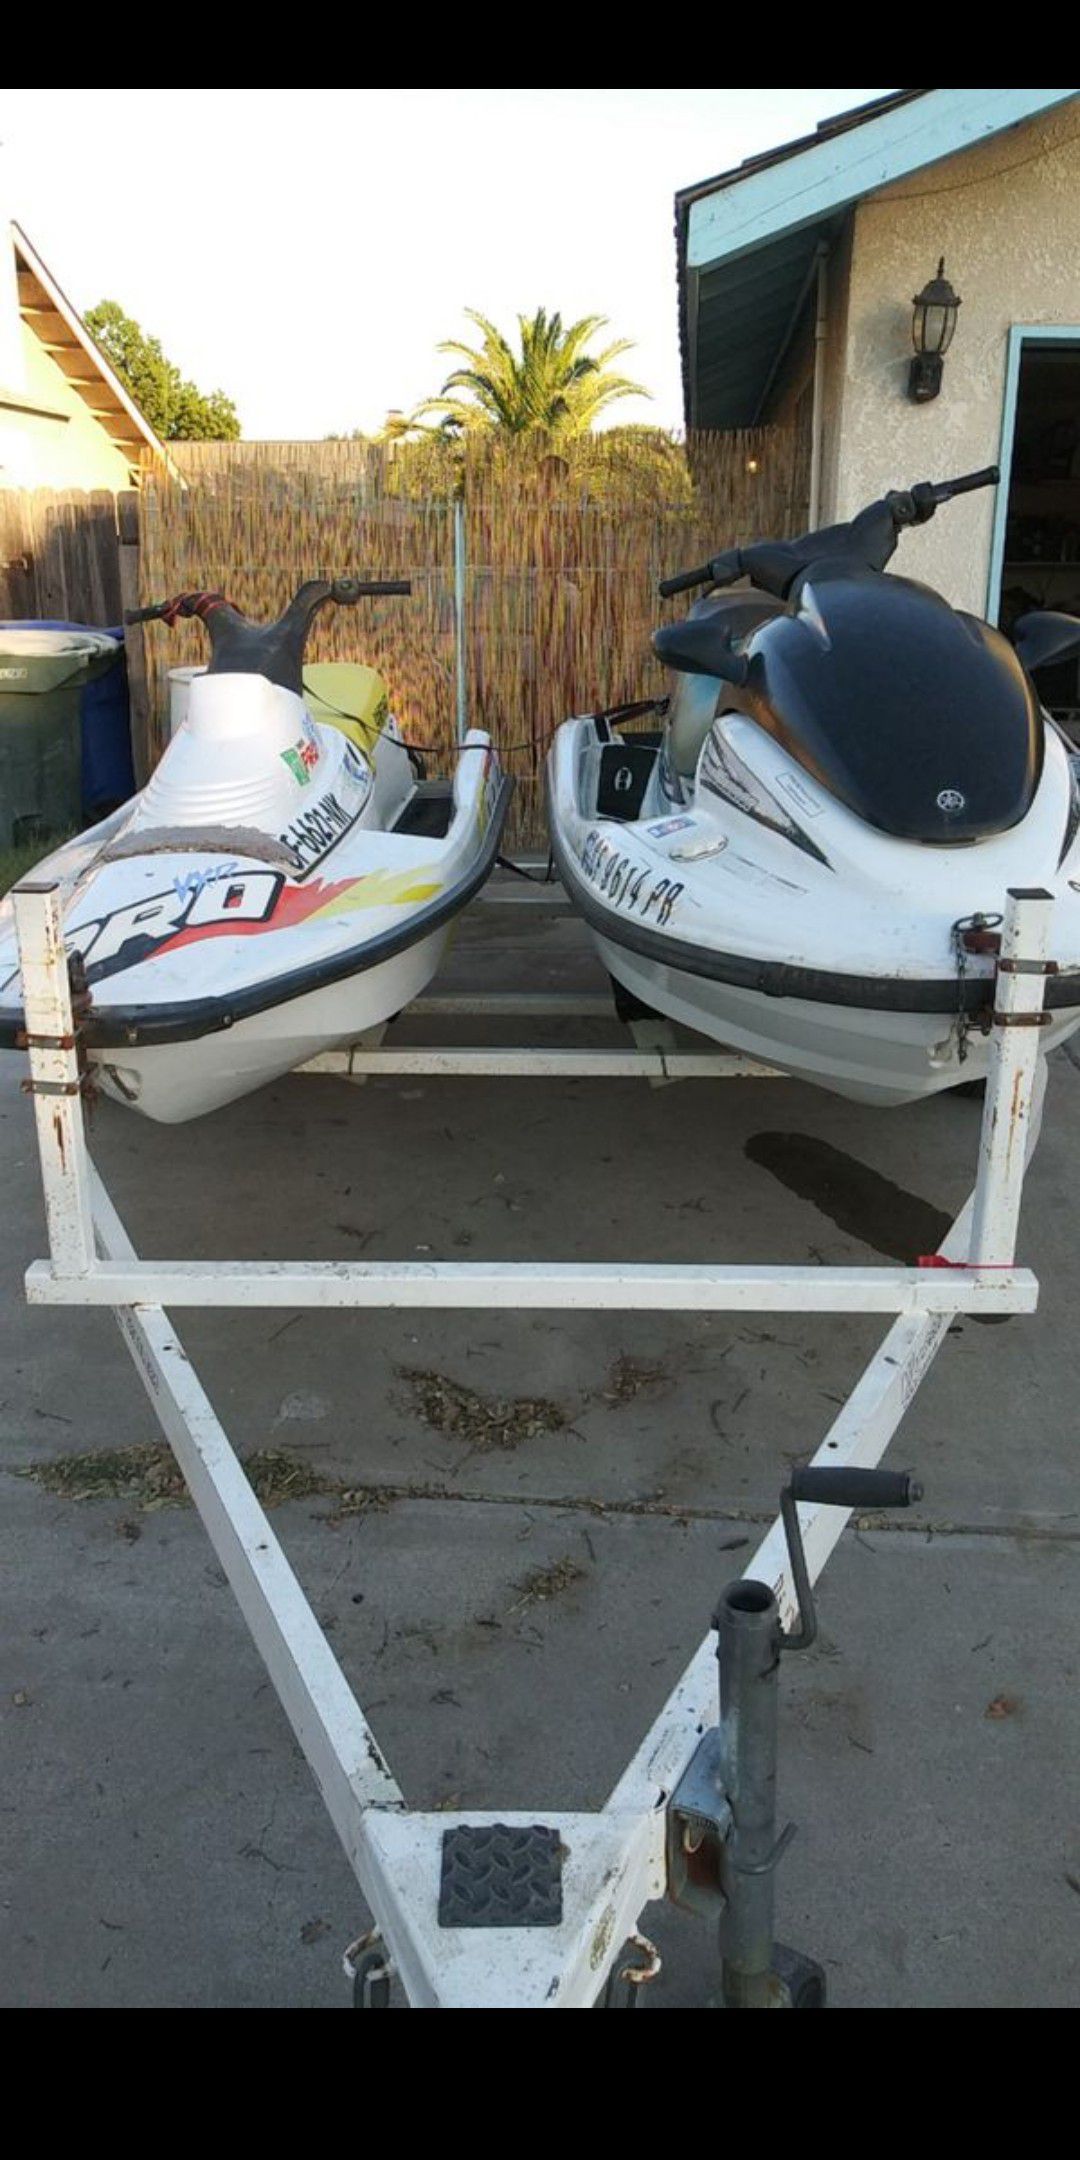 3 jet skis and trailer